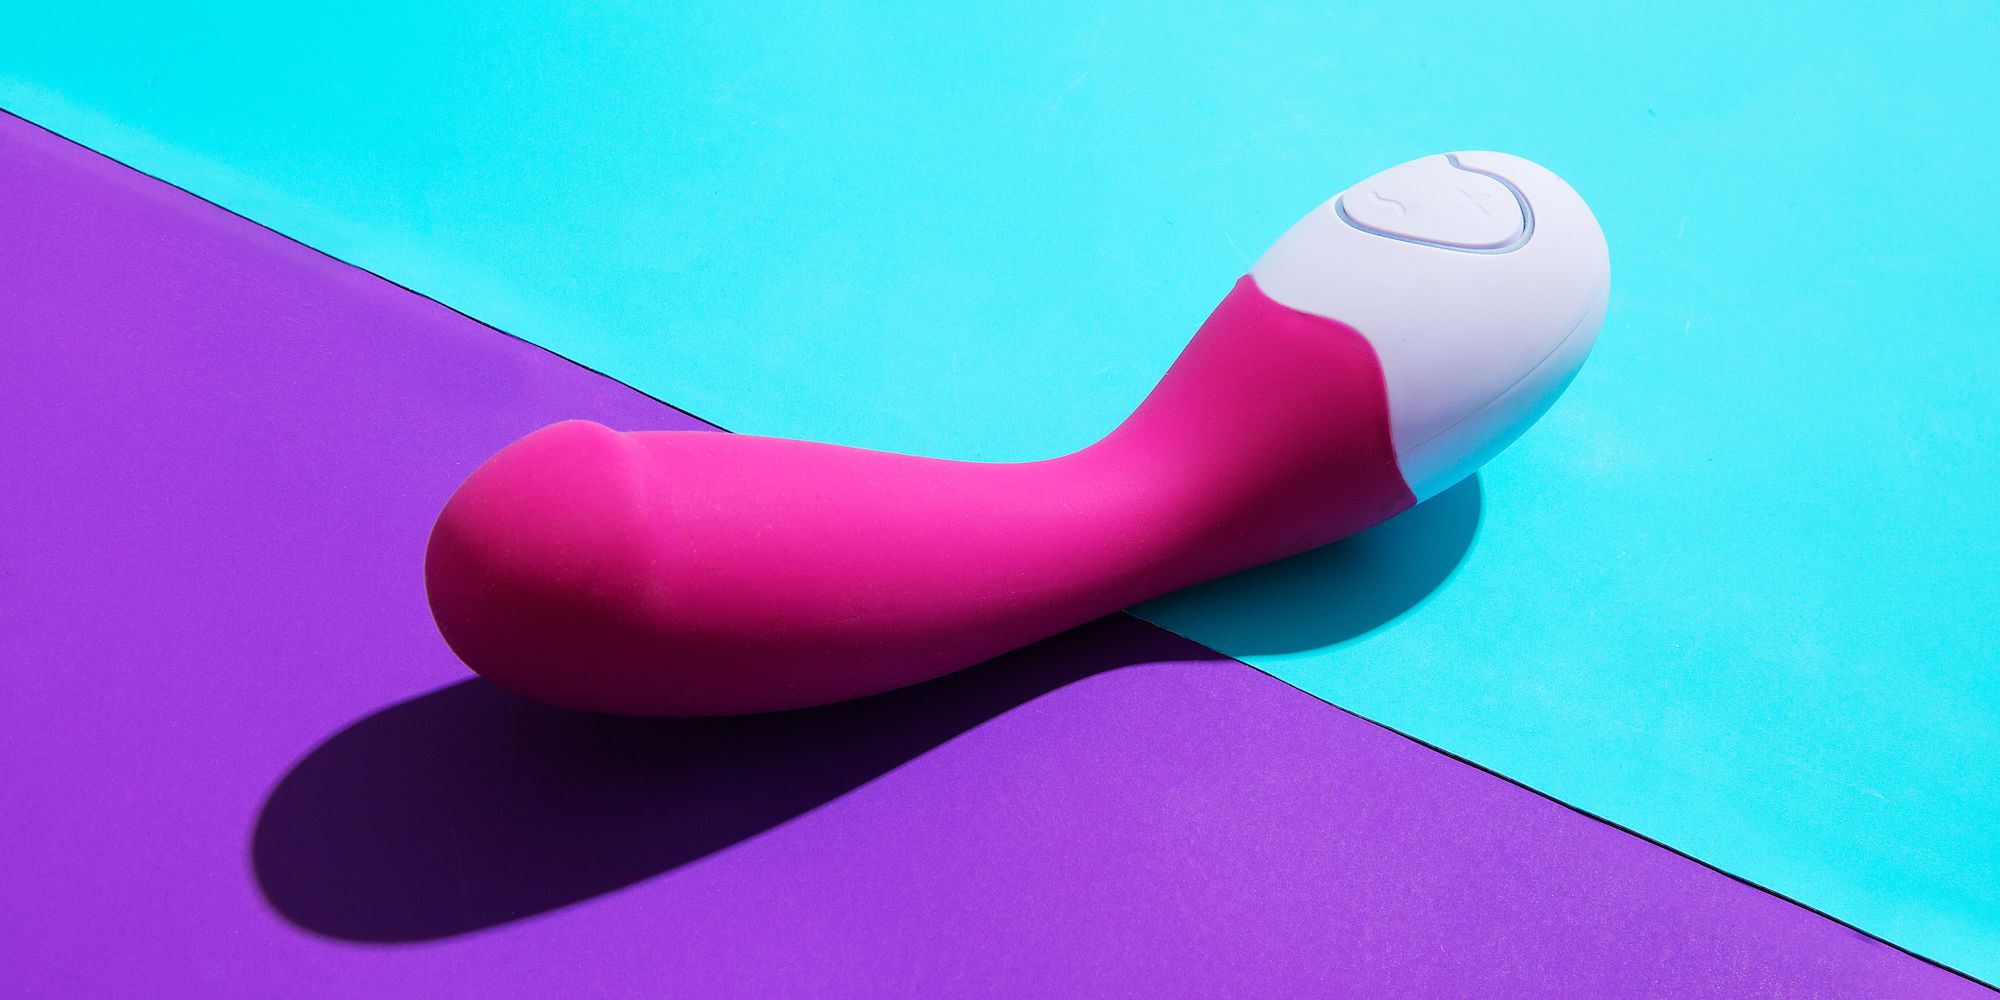 How Does Using a Vibrator Affect Your Body? image